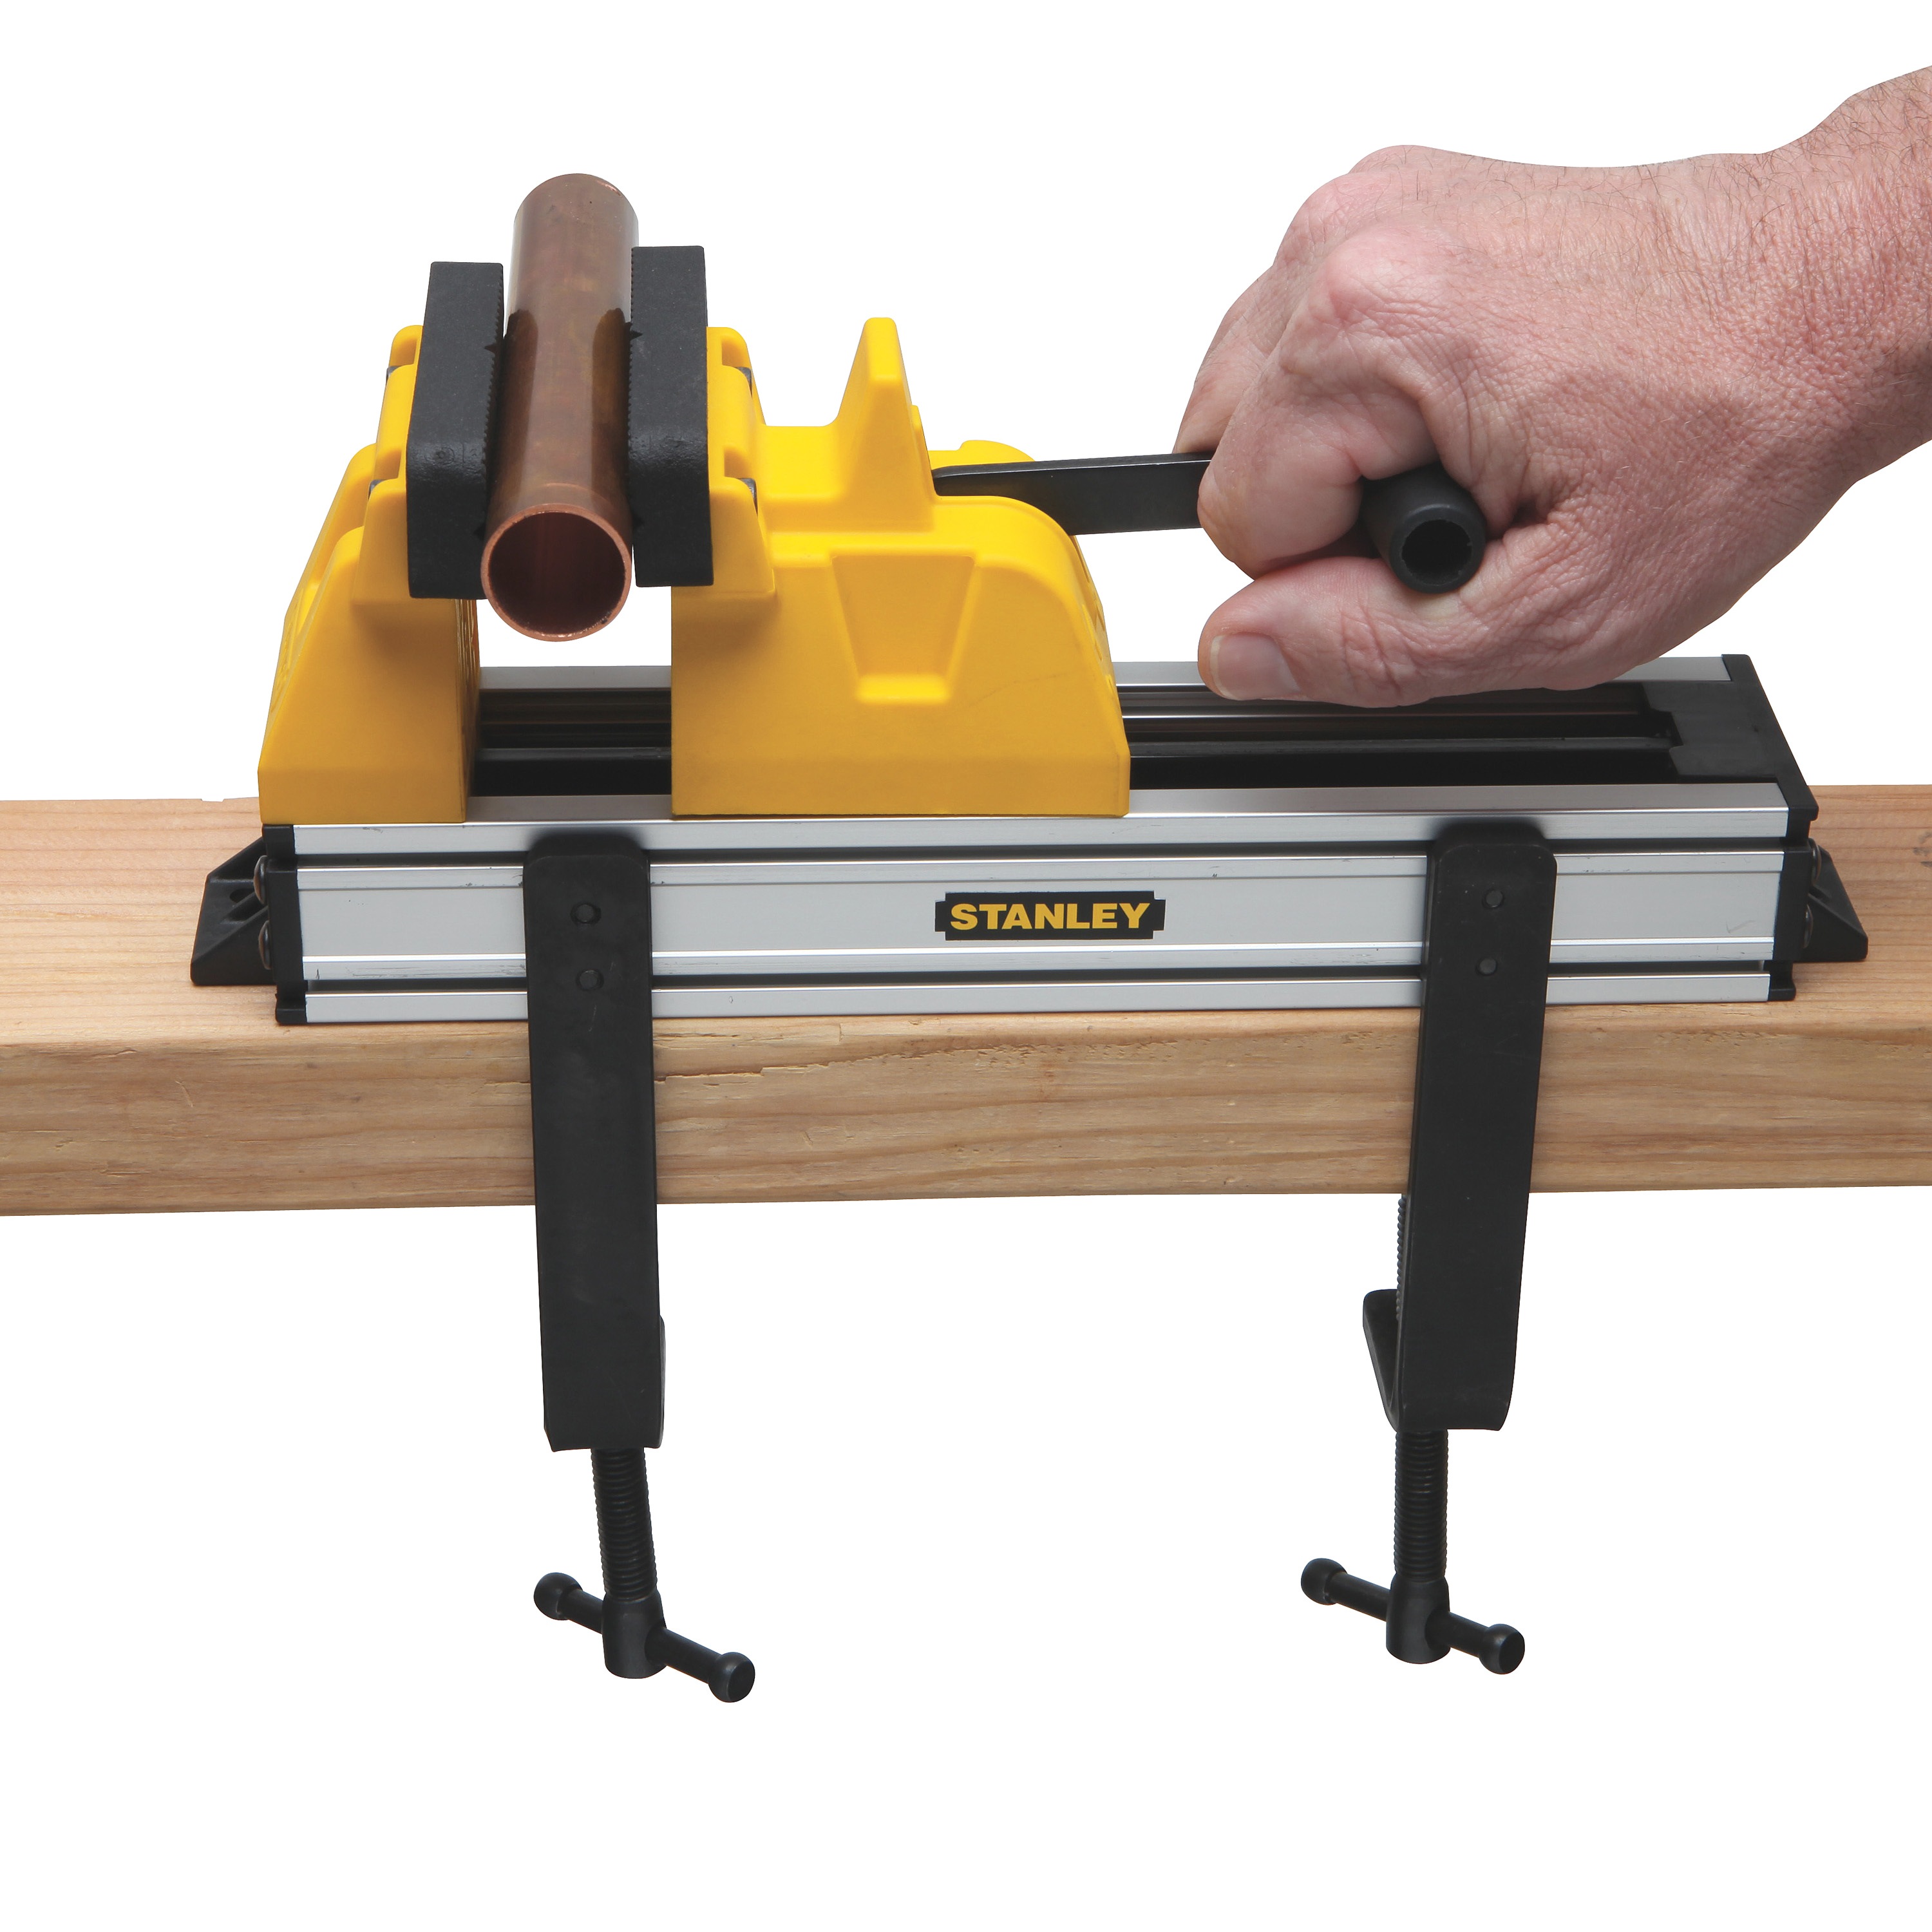 Stanley Tools - 438 Jaw Capacity Quick Vise - STHT83179